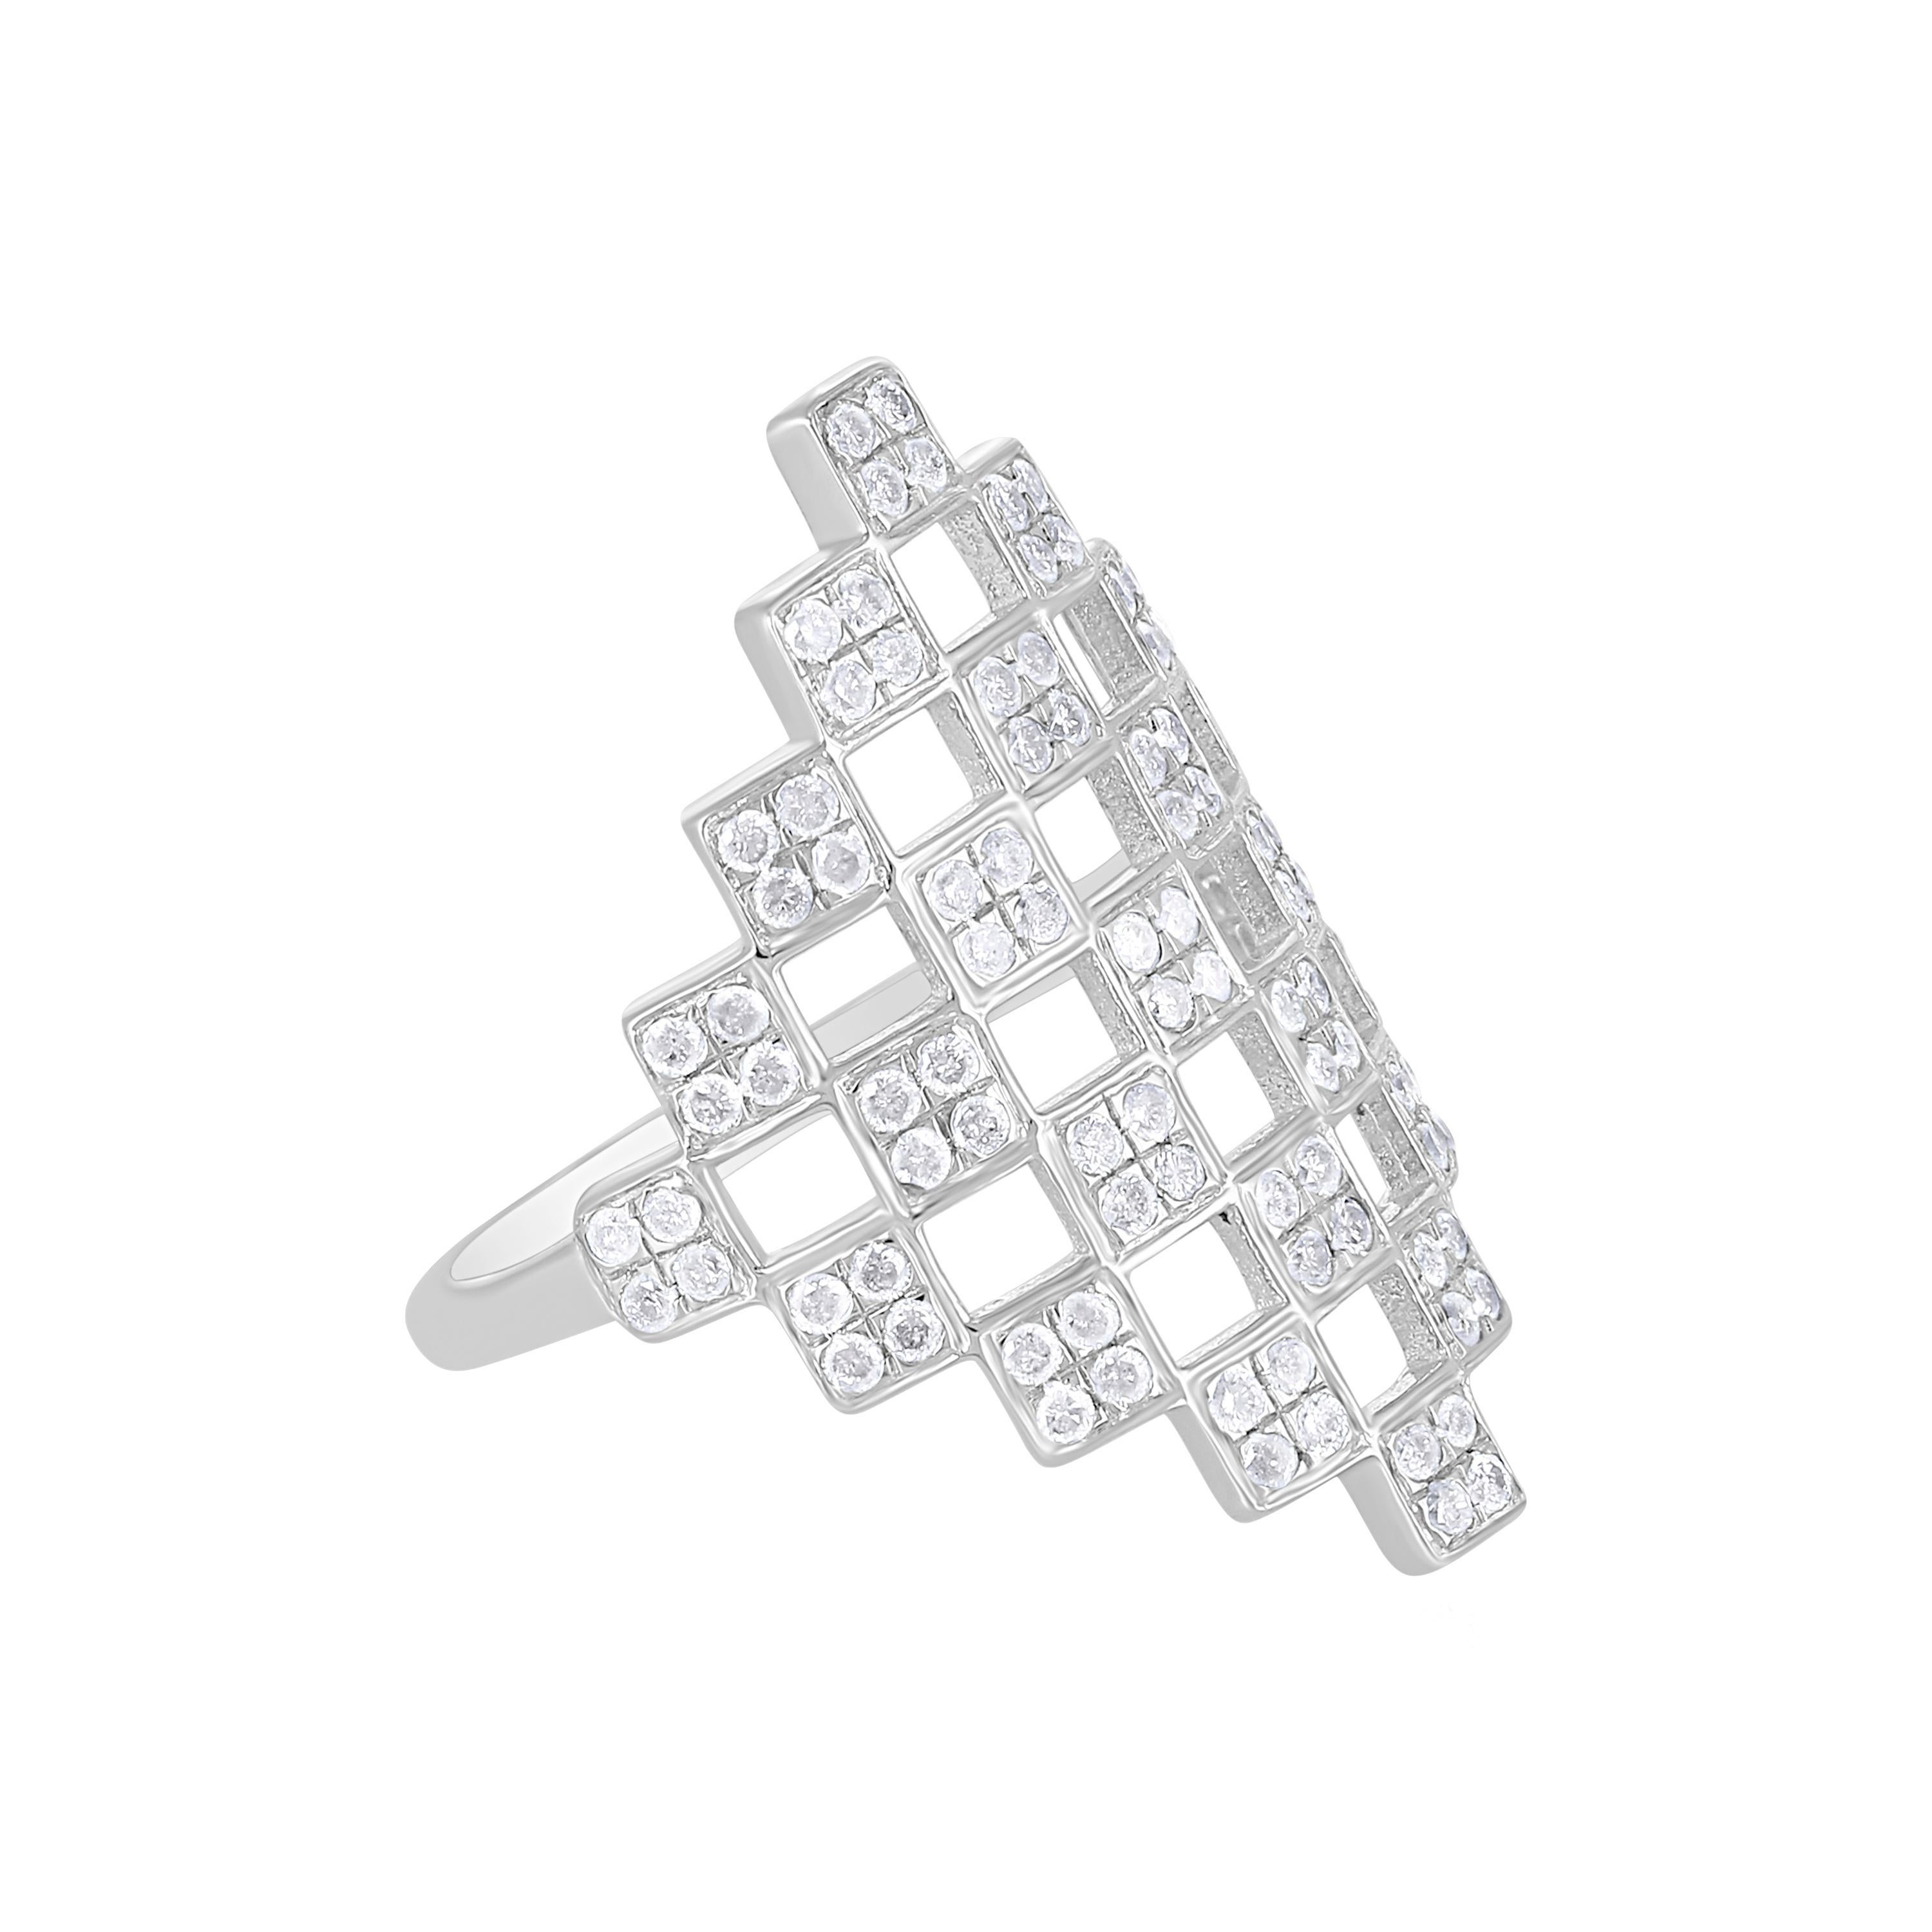 Contemporary Gemistry 0.88 Carat T.W. Diamond Freeform Latice Ring in 925 Sterling Silver For Sale